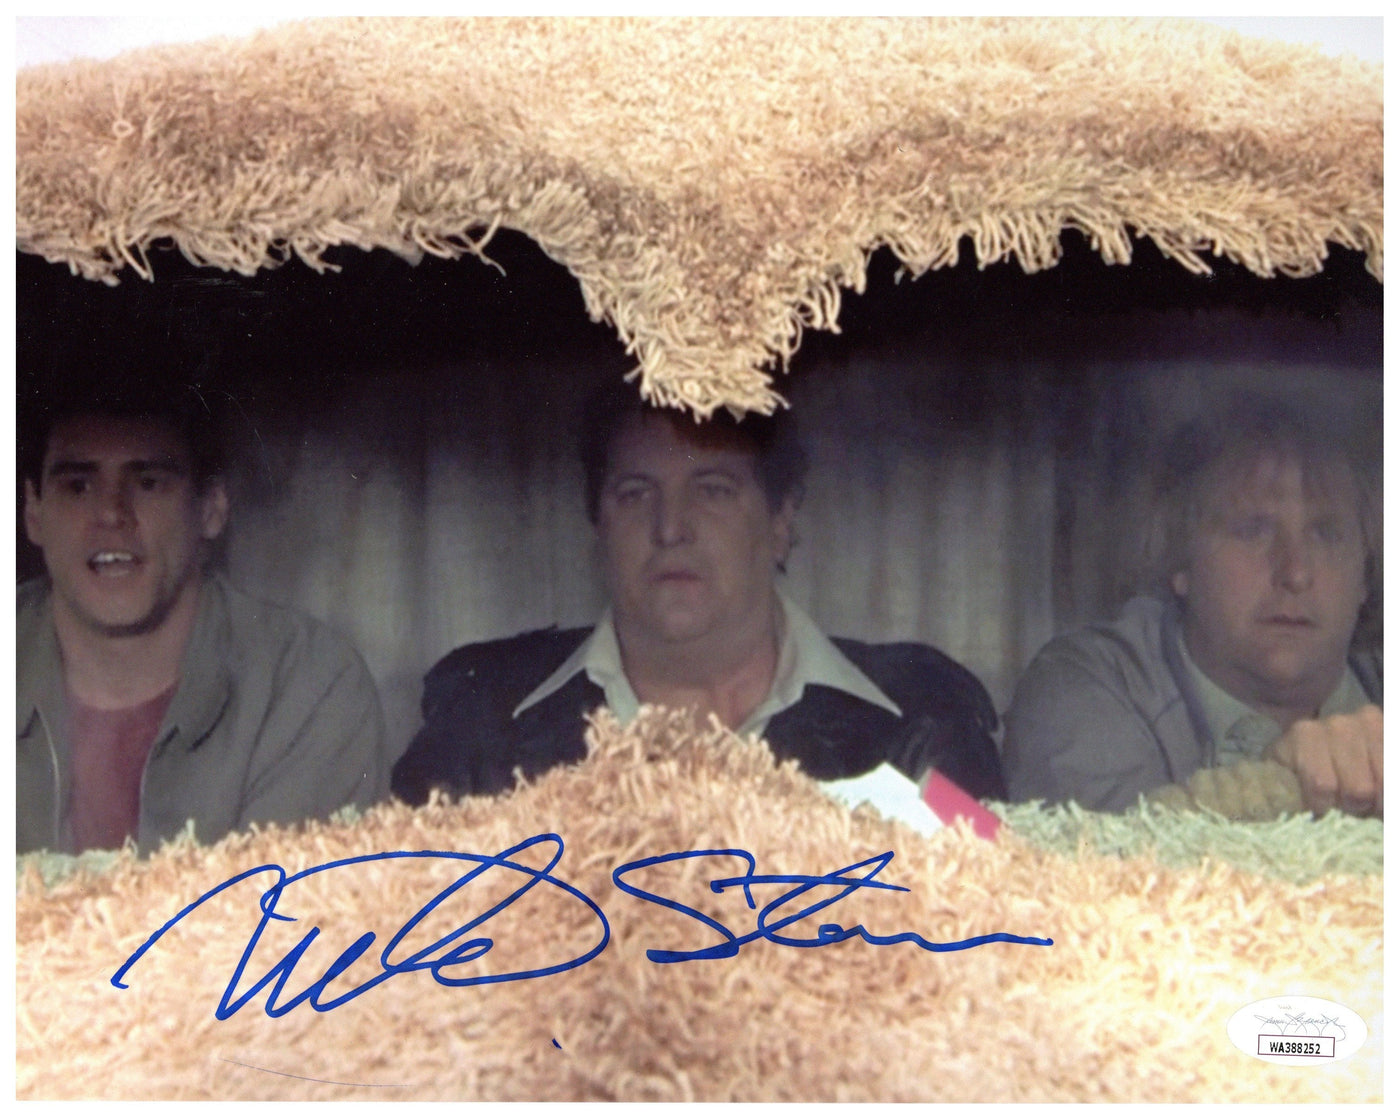 MIKE STARR SIGNED 8X10 PHOTO DUMB AND DUMBER AUTOGRAPHED JSA COA 2